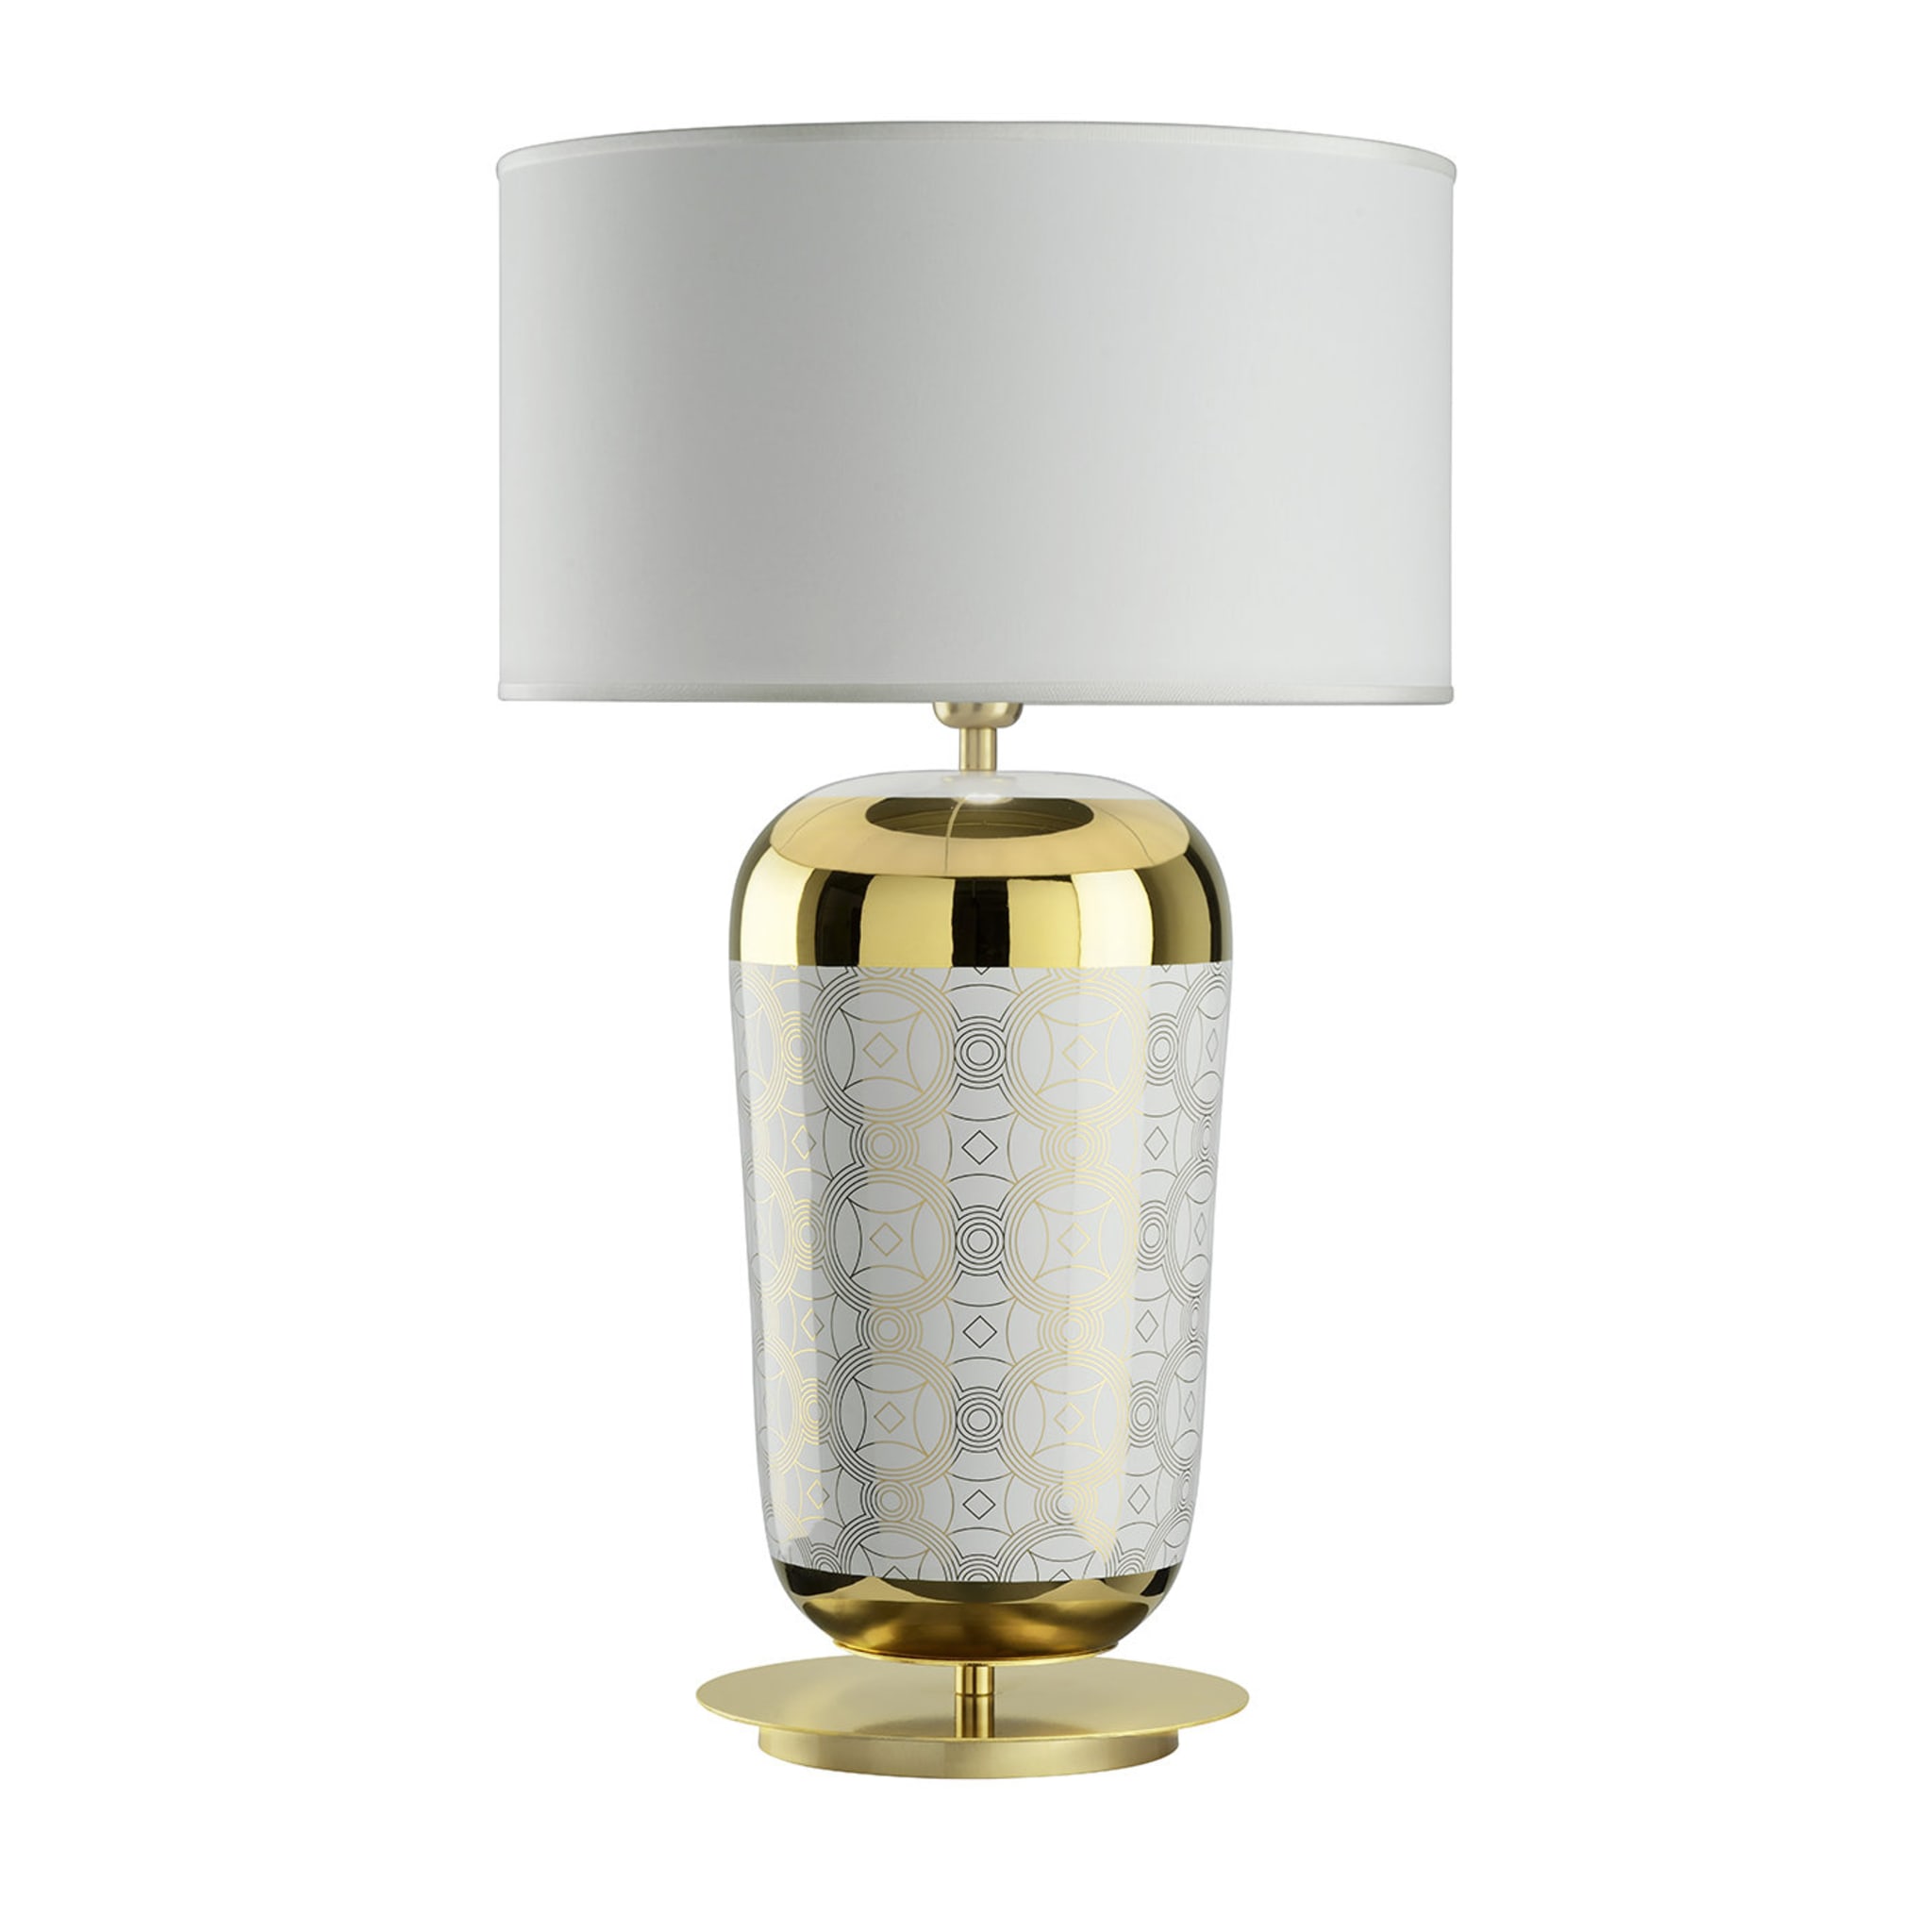 Decorum White and Gold Table Lamp - Main view